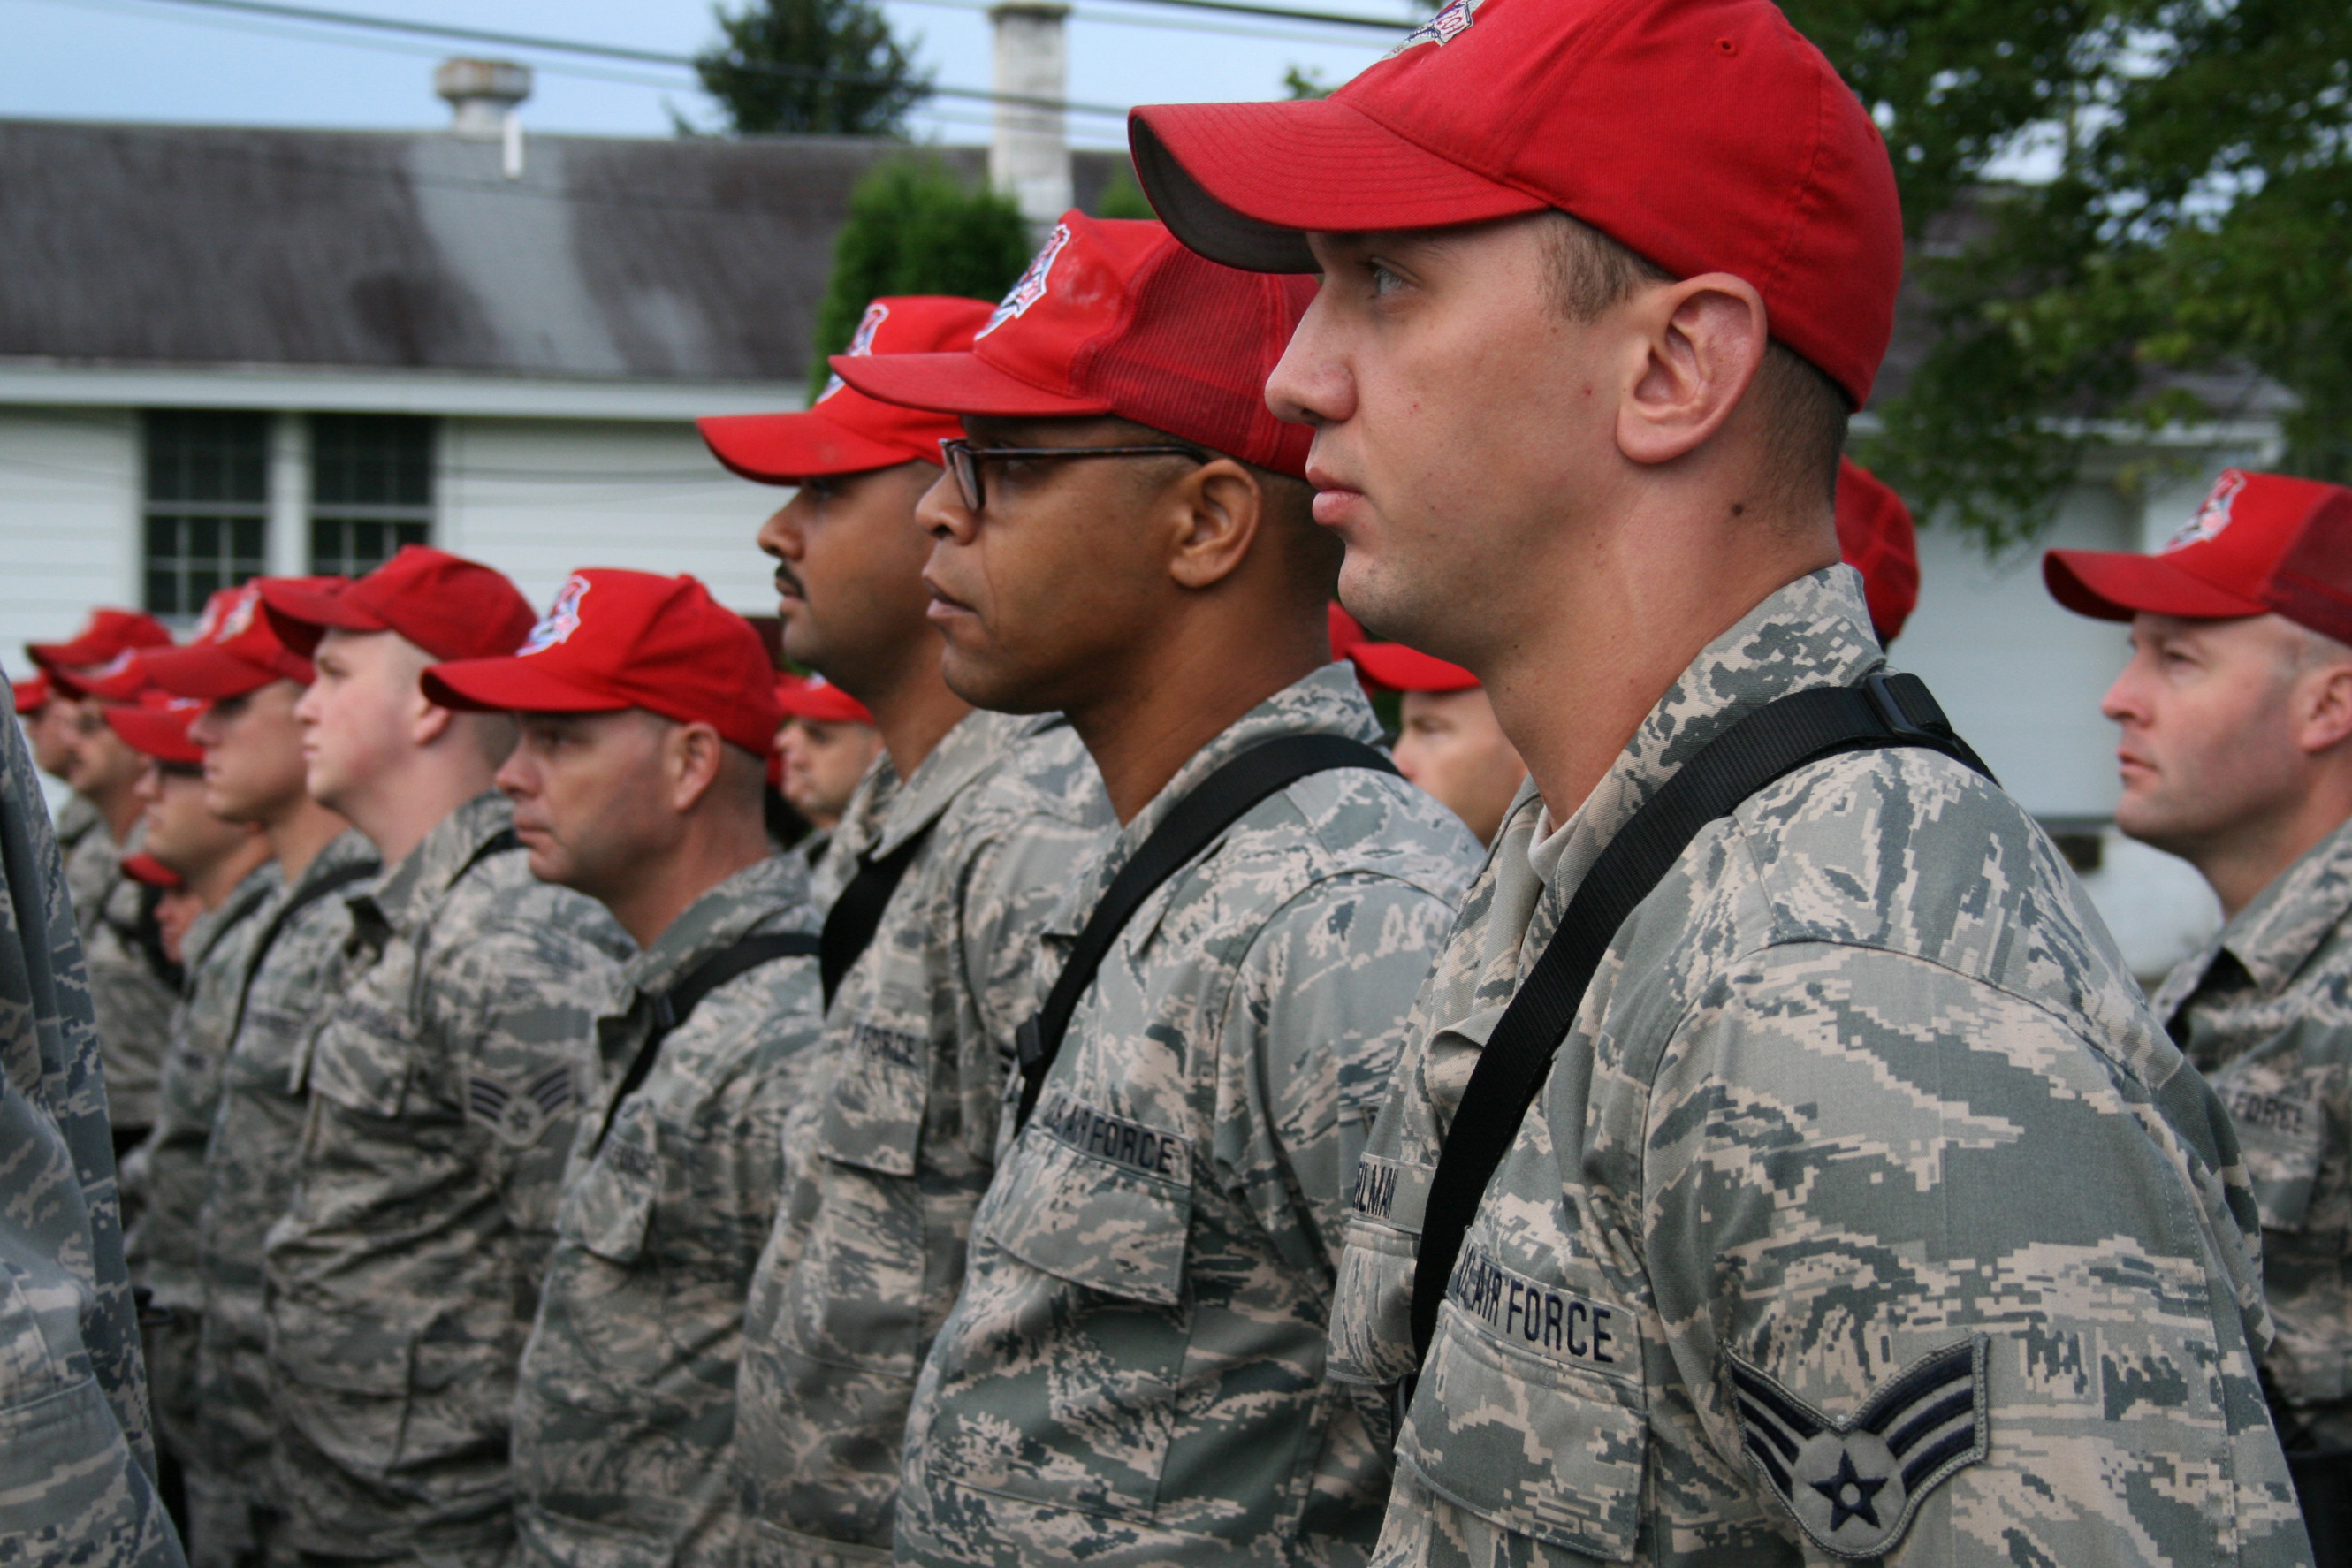 Red hat: Symbol of combat civil engineers' 'Can do, will do, have done'  creed > 193rd Special Operations Wing > Display